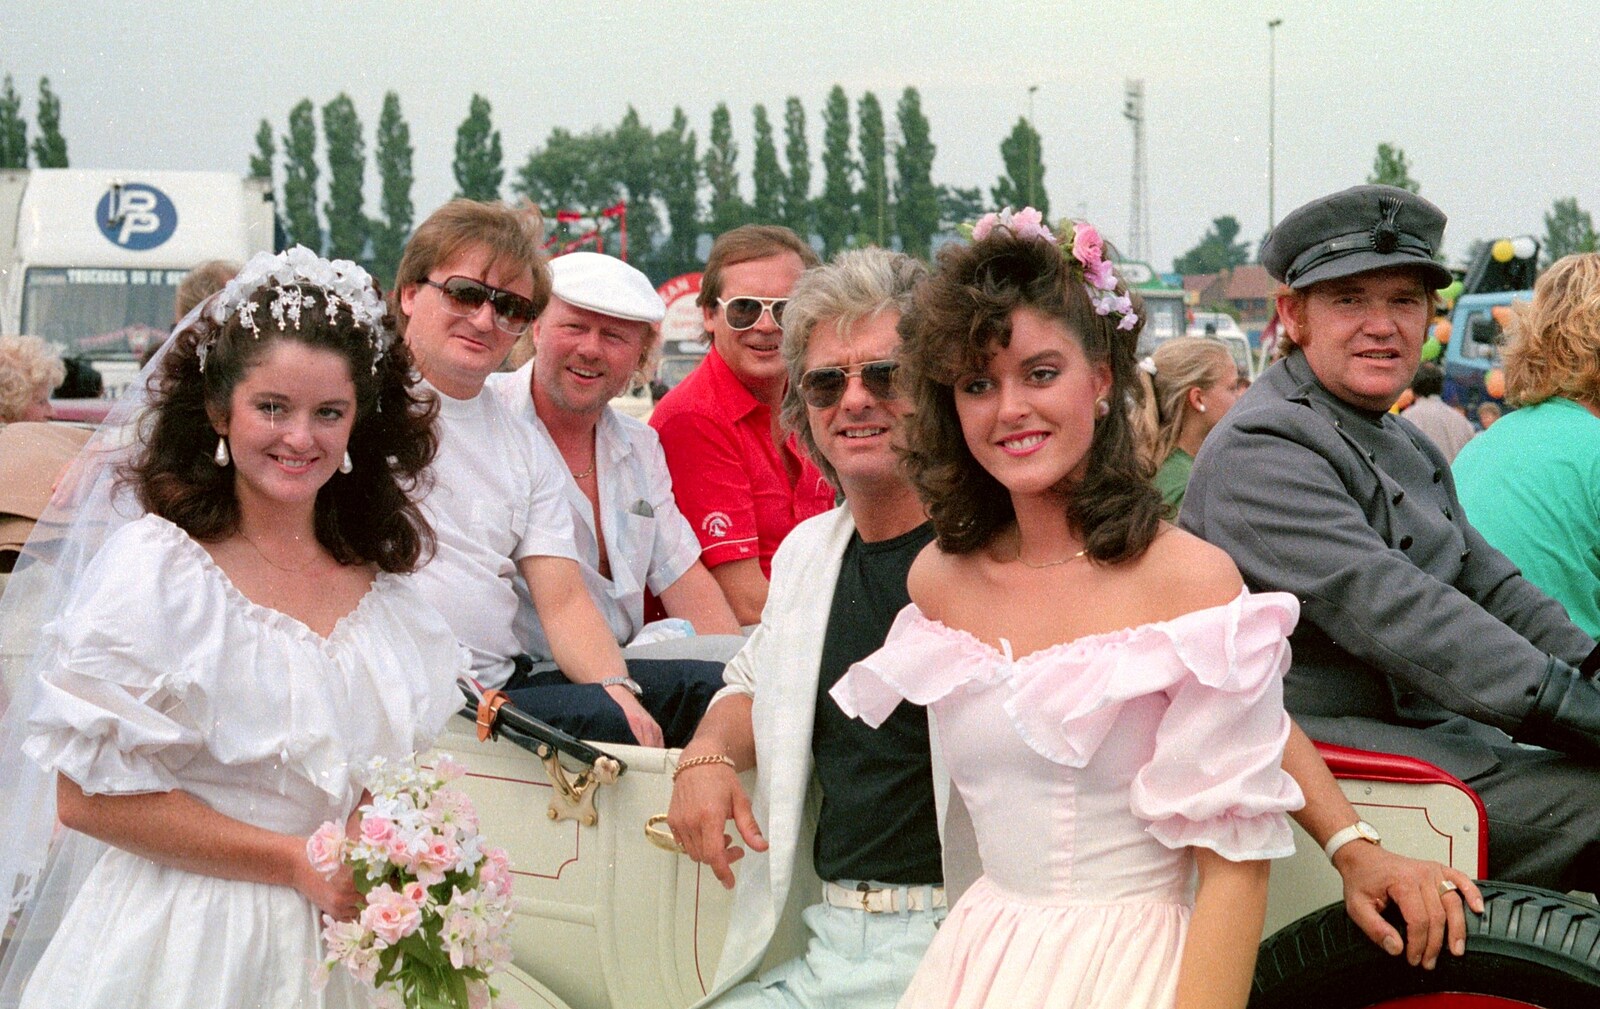 The Wurzels pose with a bridal party from McCarthy and Stone and the Bournemouth Carnival, Dorset - 8th August 1986